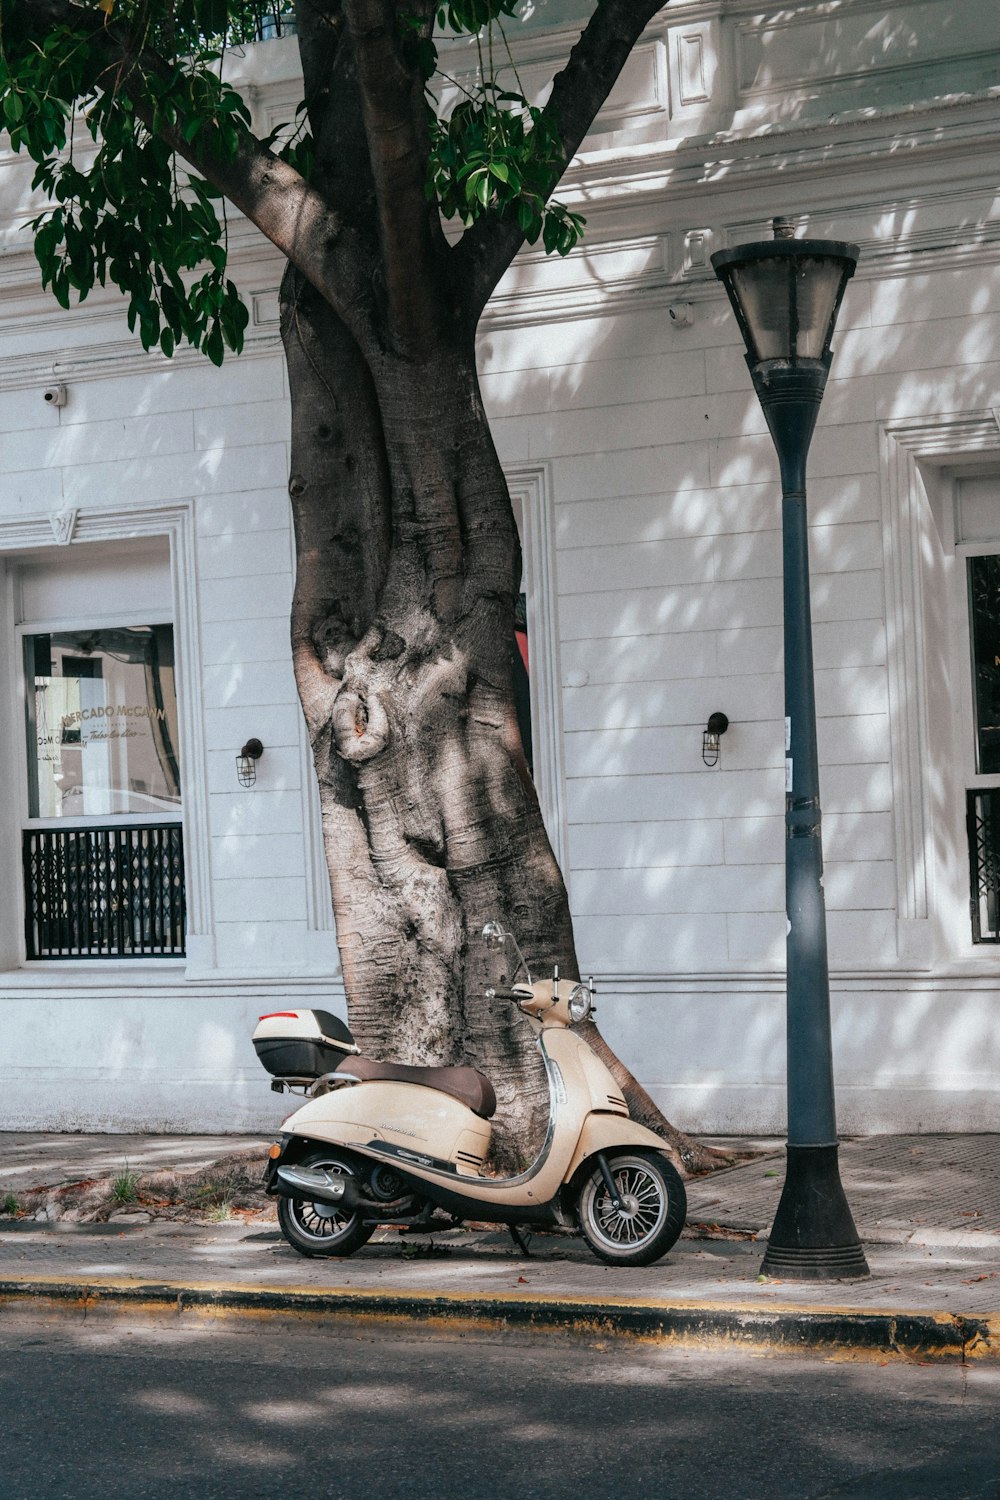 a scooter parked next to a tree on a city street